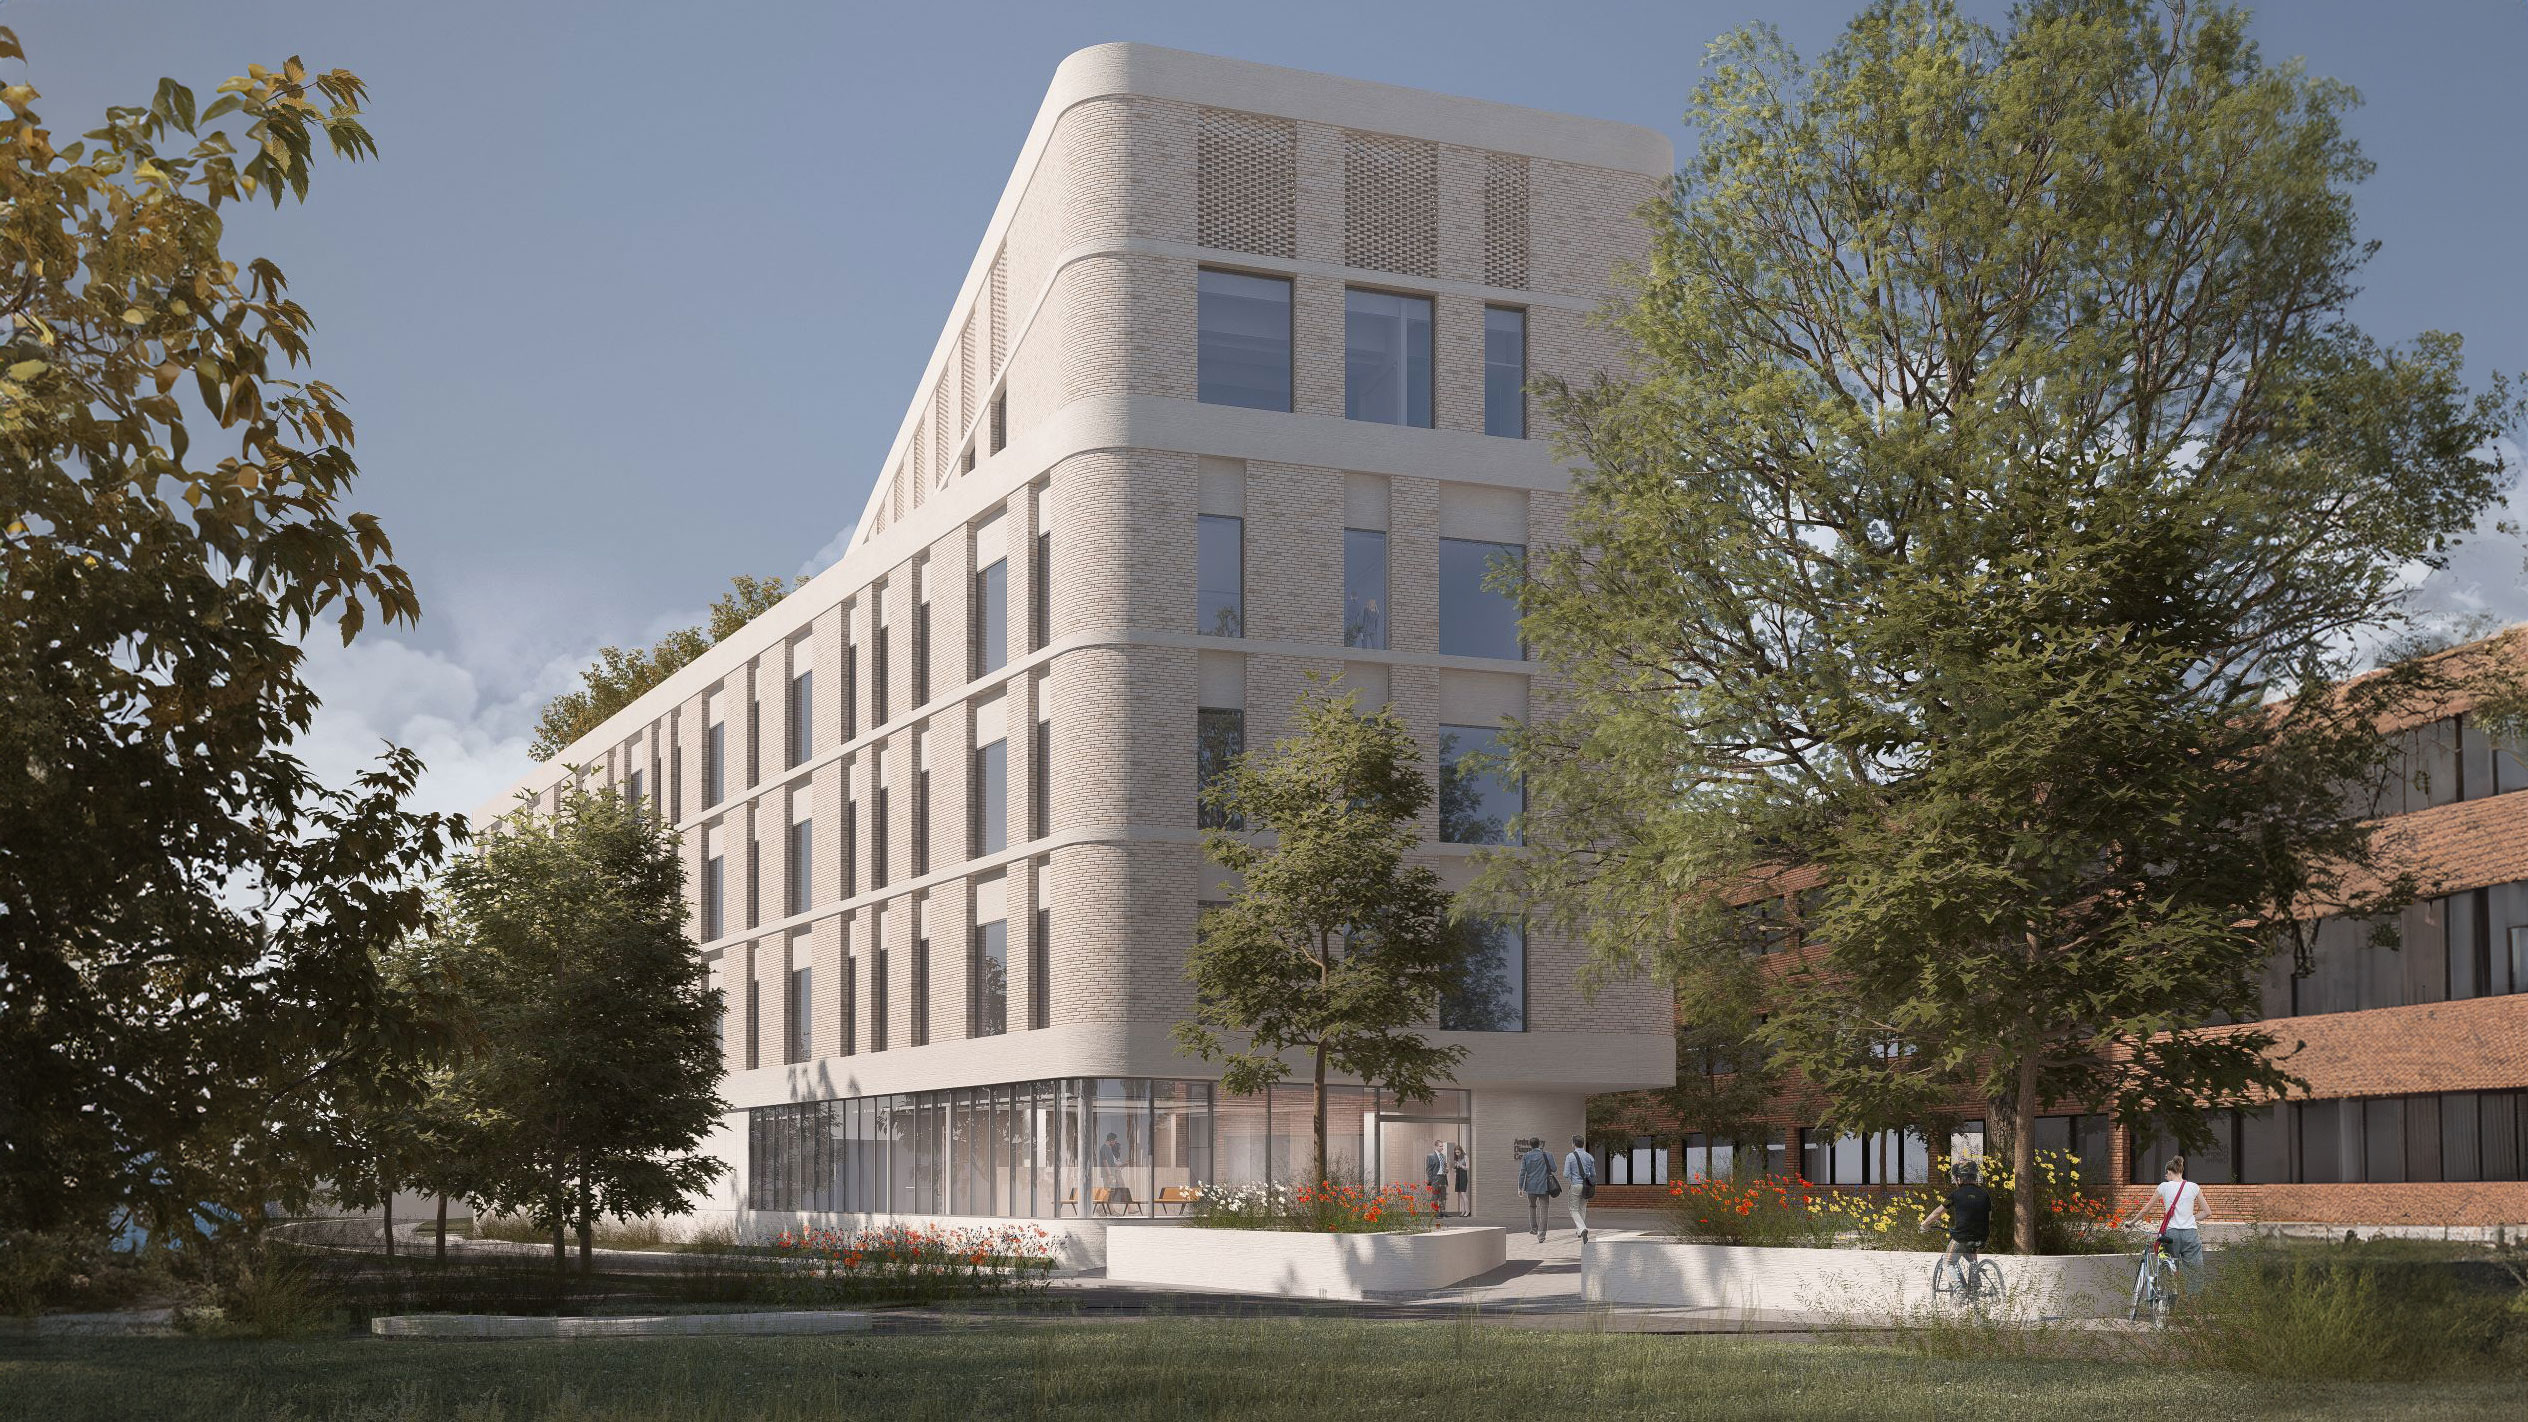 £80 million new diagnostic centre approved for patients in North West London